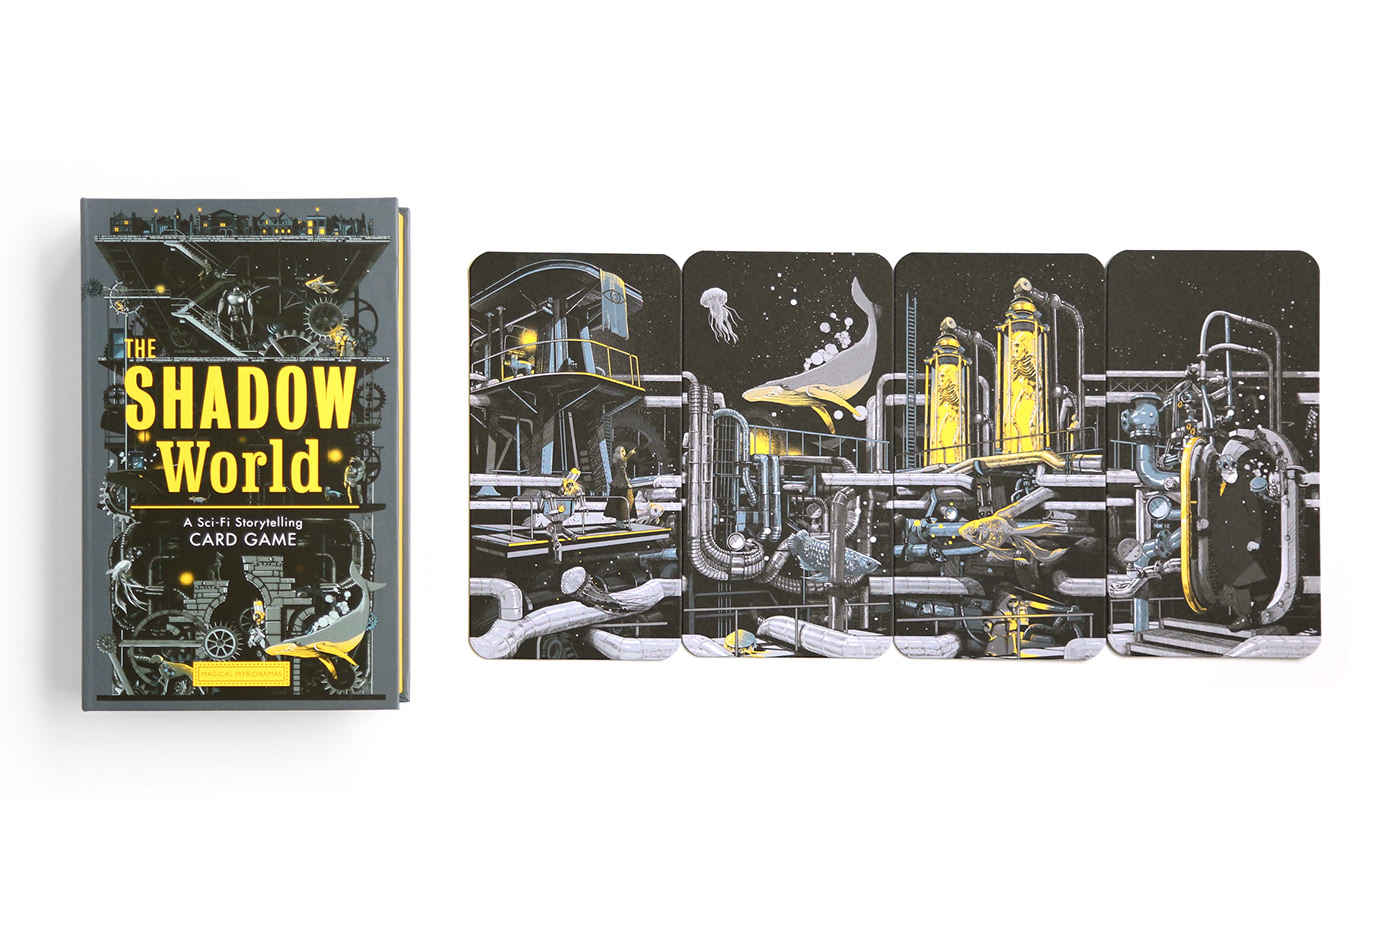 the shadow world laurence king book Game Card steam punk sci-fi robot ILLUSTRATION  myrioramas